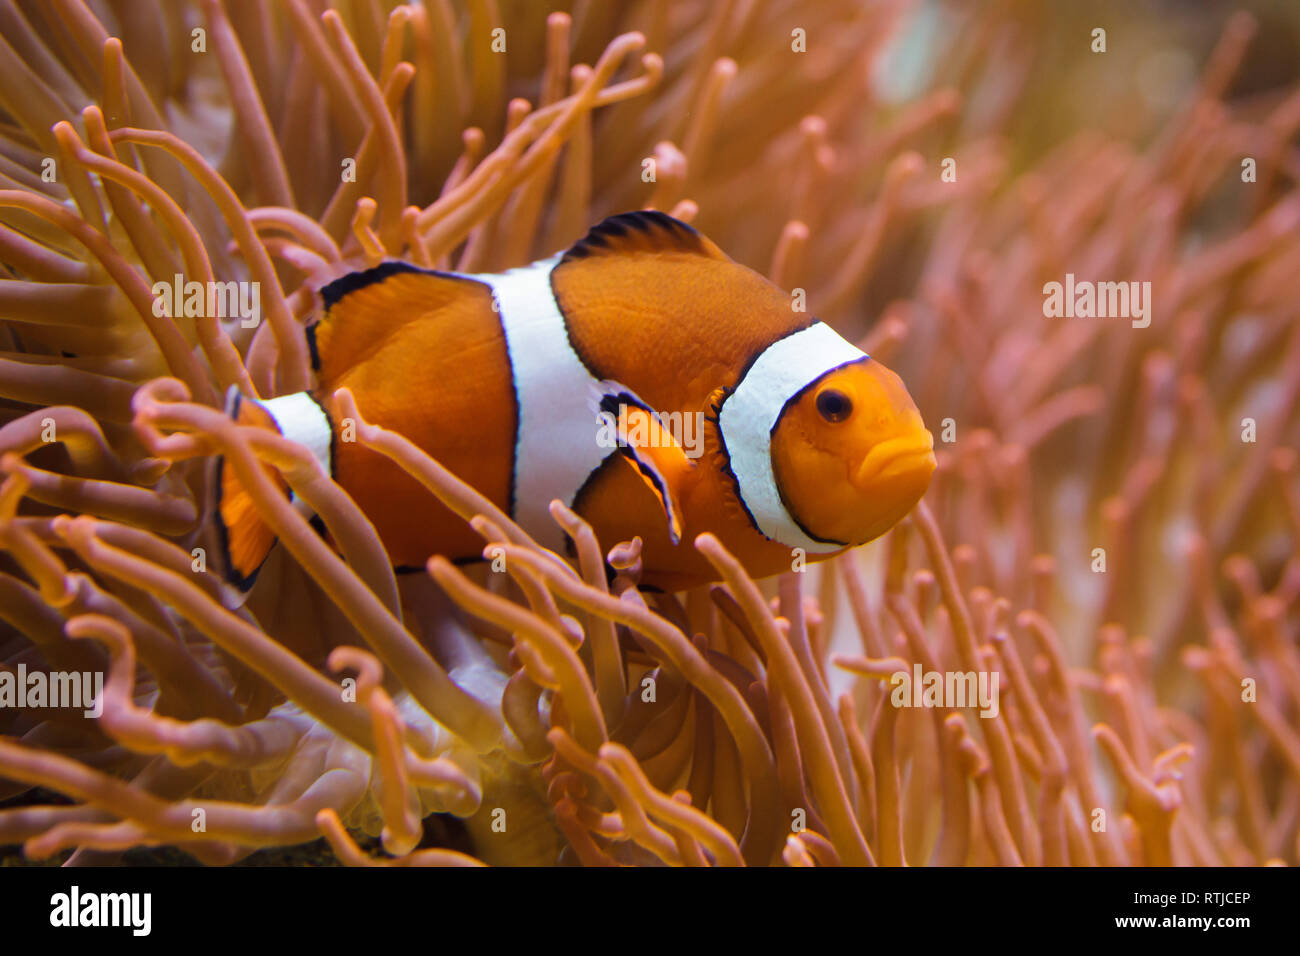 Ocellaris clownfish (Amphiprion ocellaris), also known as the false percula clownfish, swimming in the magnificent sea anemone (Heteractis magnifica). Stock Photo